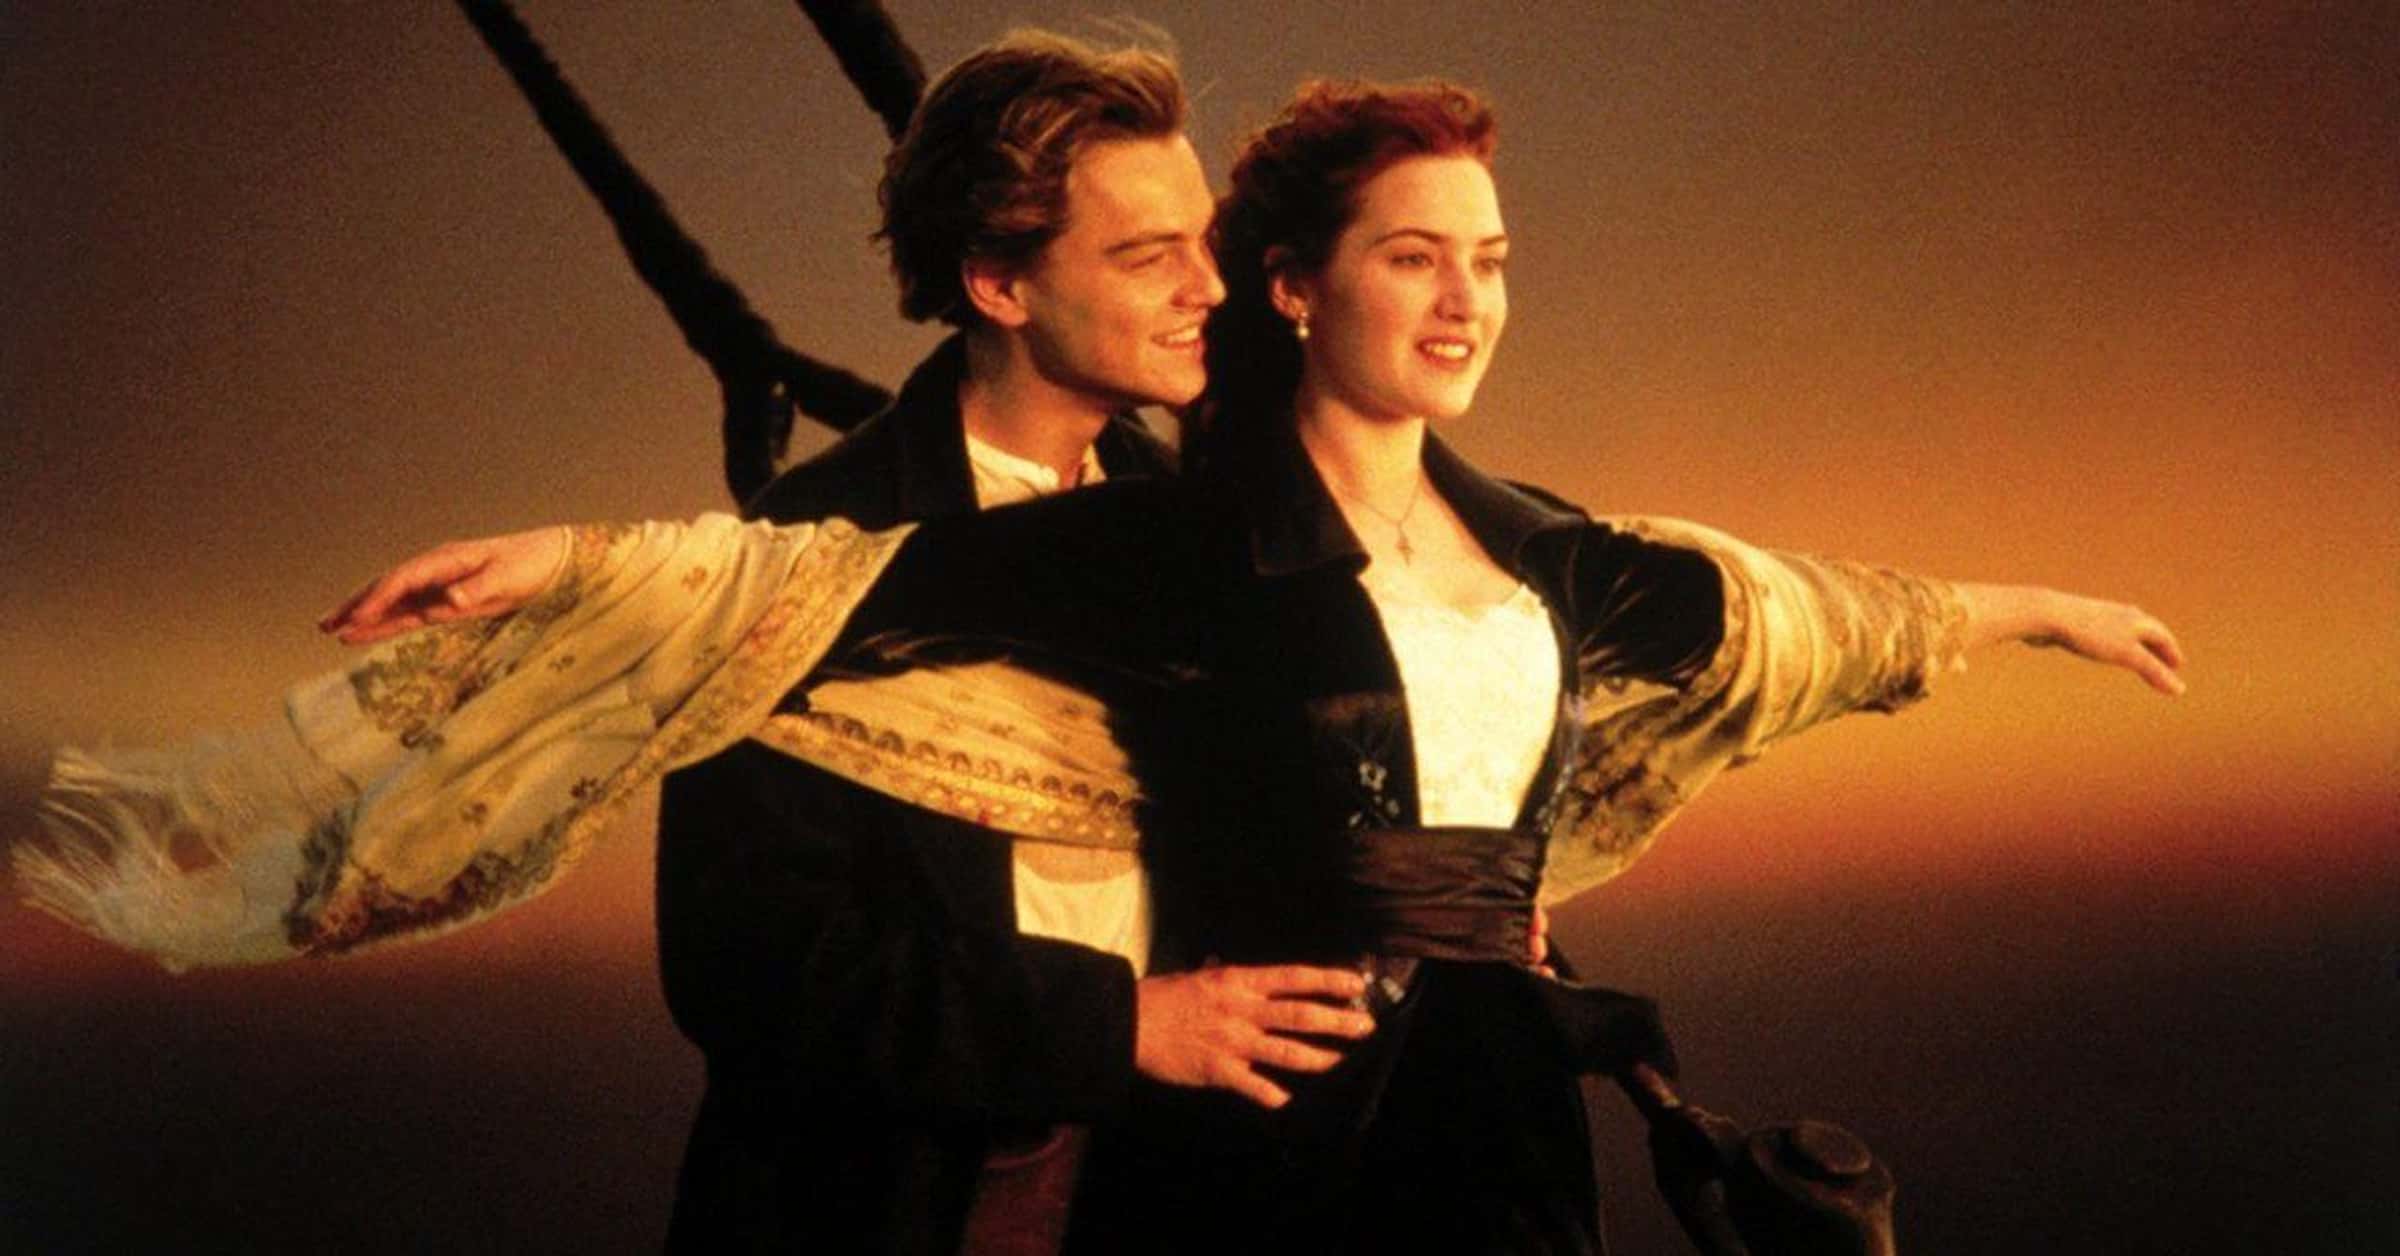 Actors Who Should Be In A 'Titanic' Remake